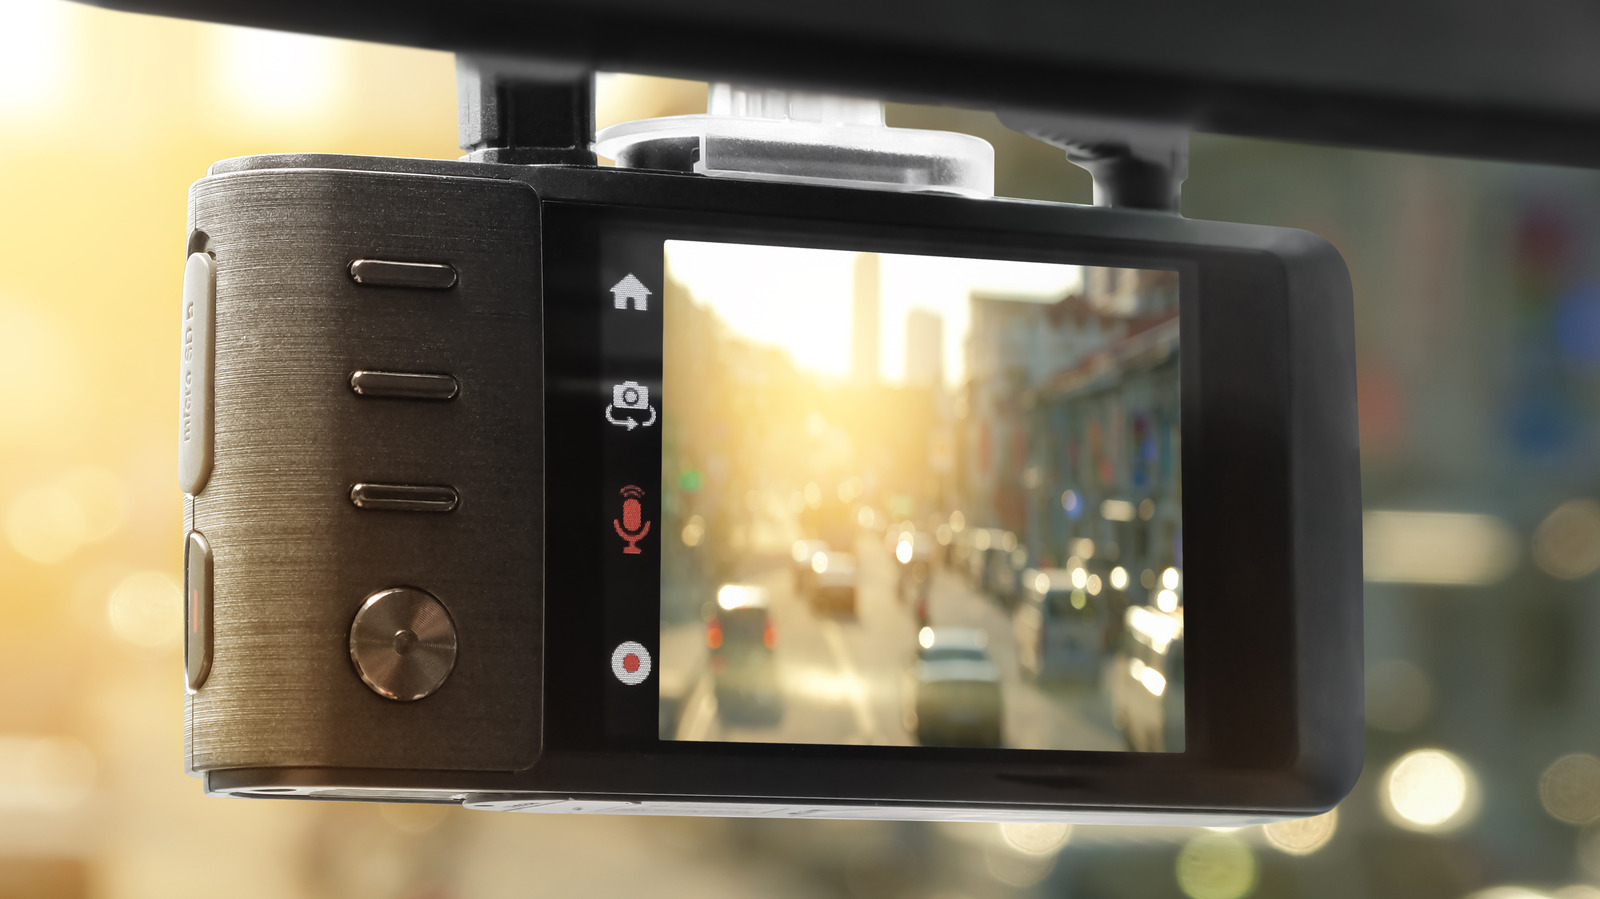 5 dash cams for your car and how to pick the best one